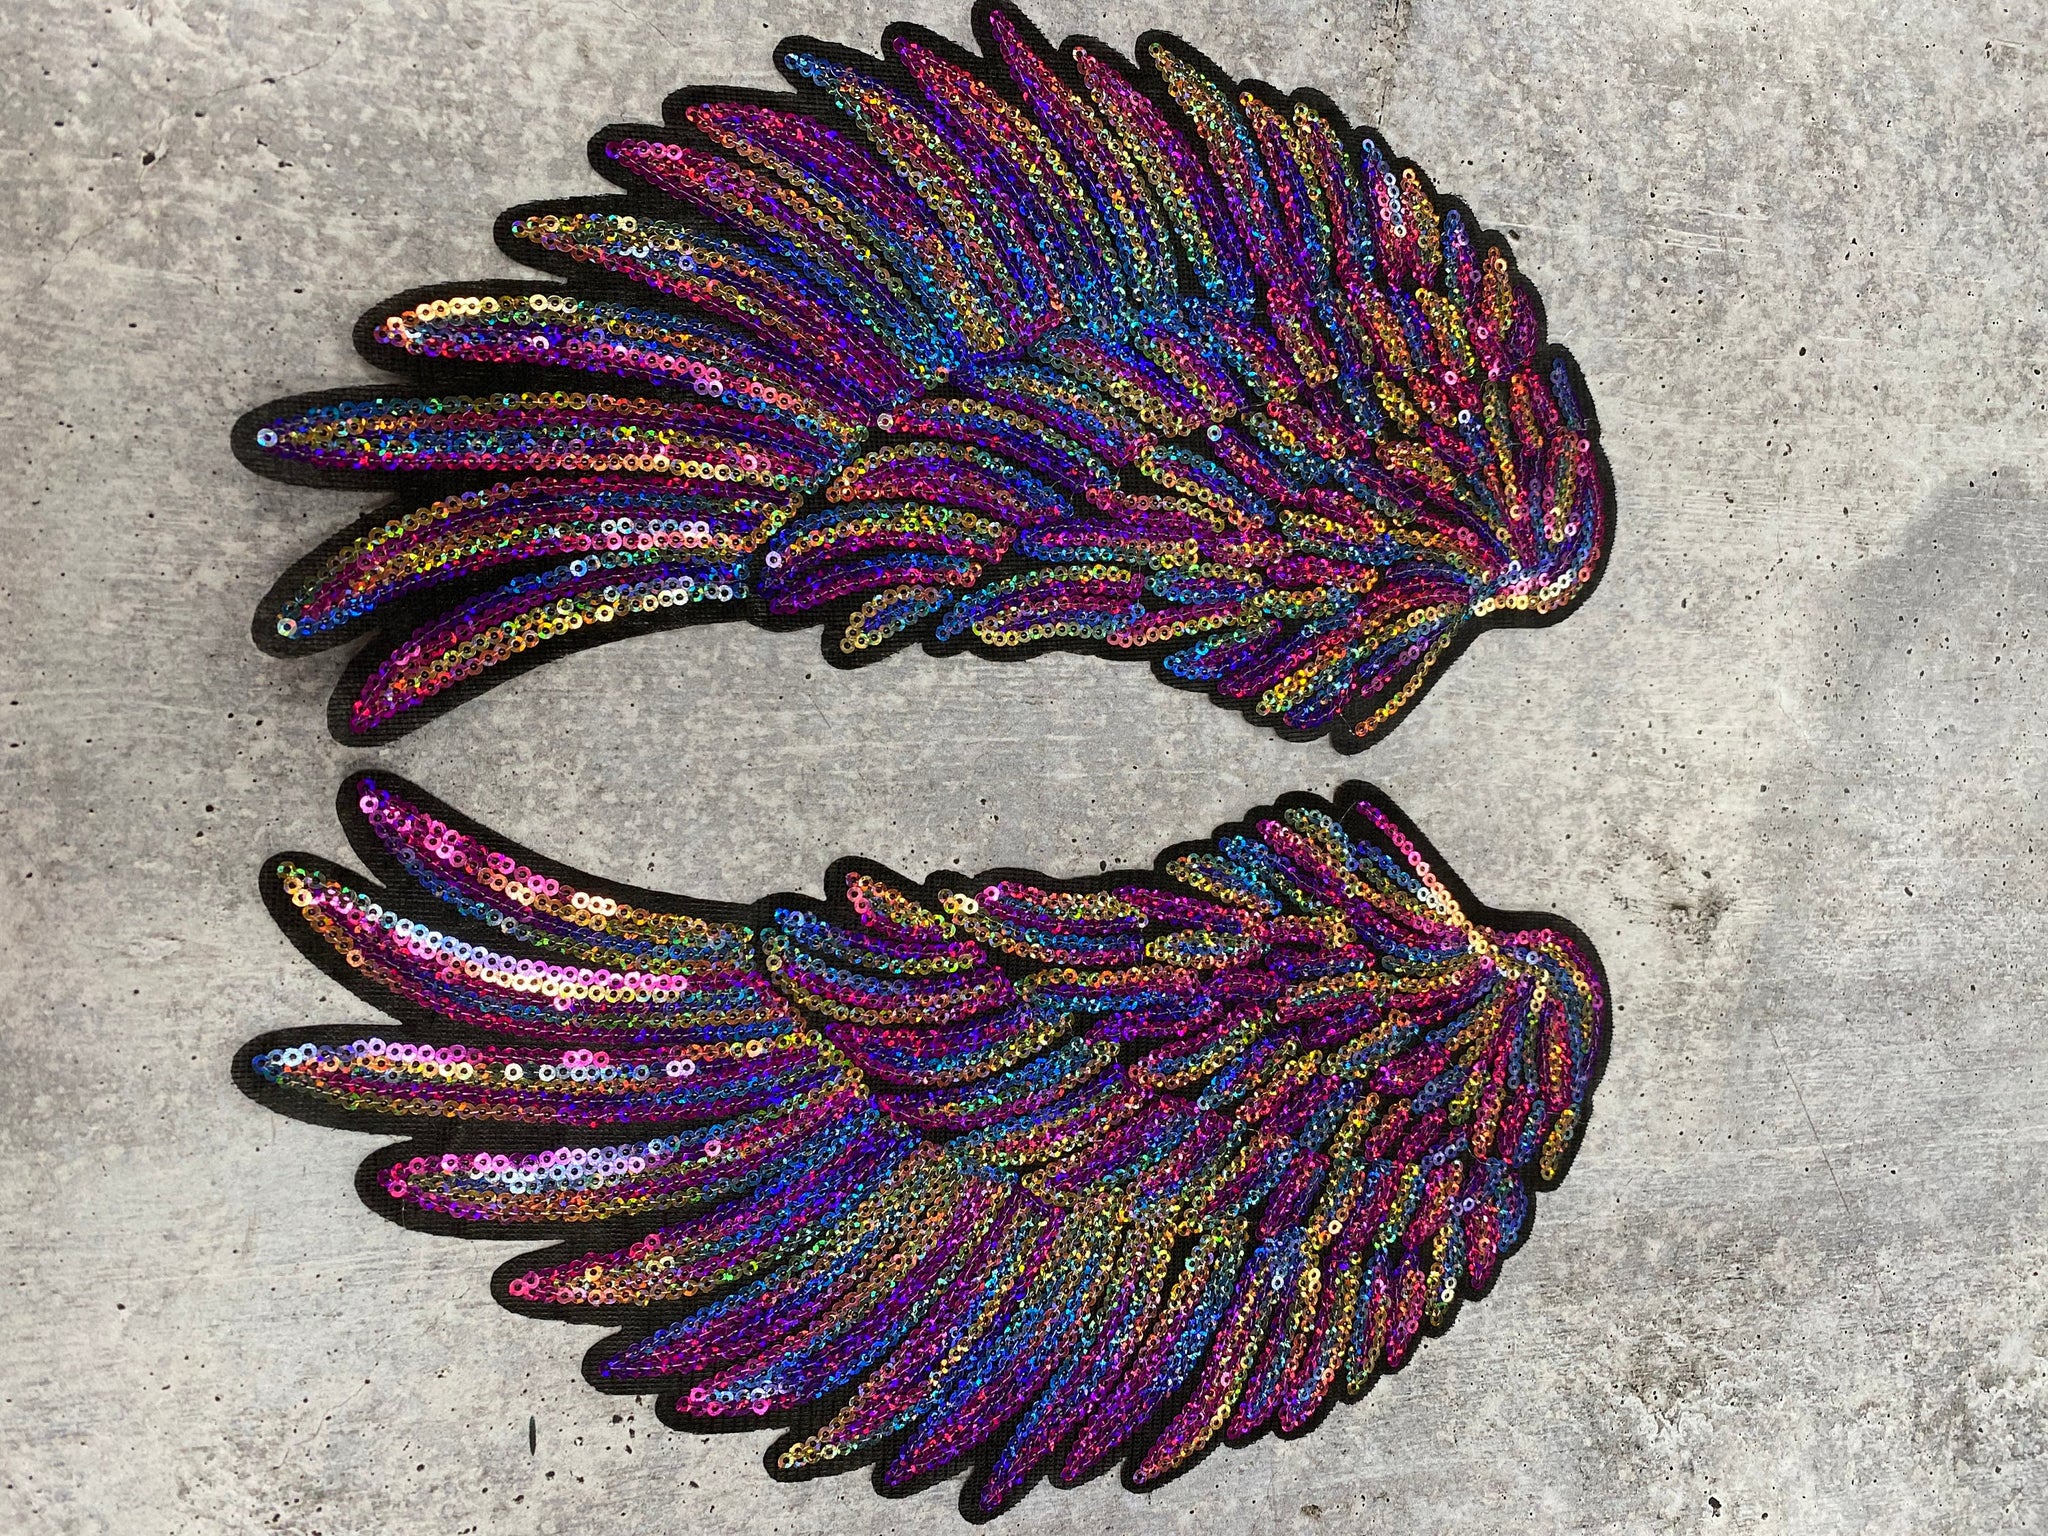 New Sequins, Multi-Colored Angel Wings Patch (iron-on) Size 10"x5.5", LARGE Bling Patch for Denim Jacket, Shirts, Hoodies